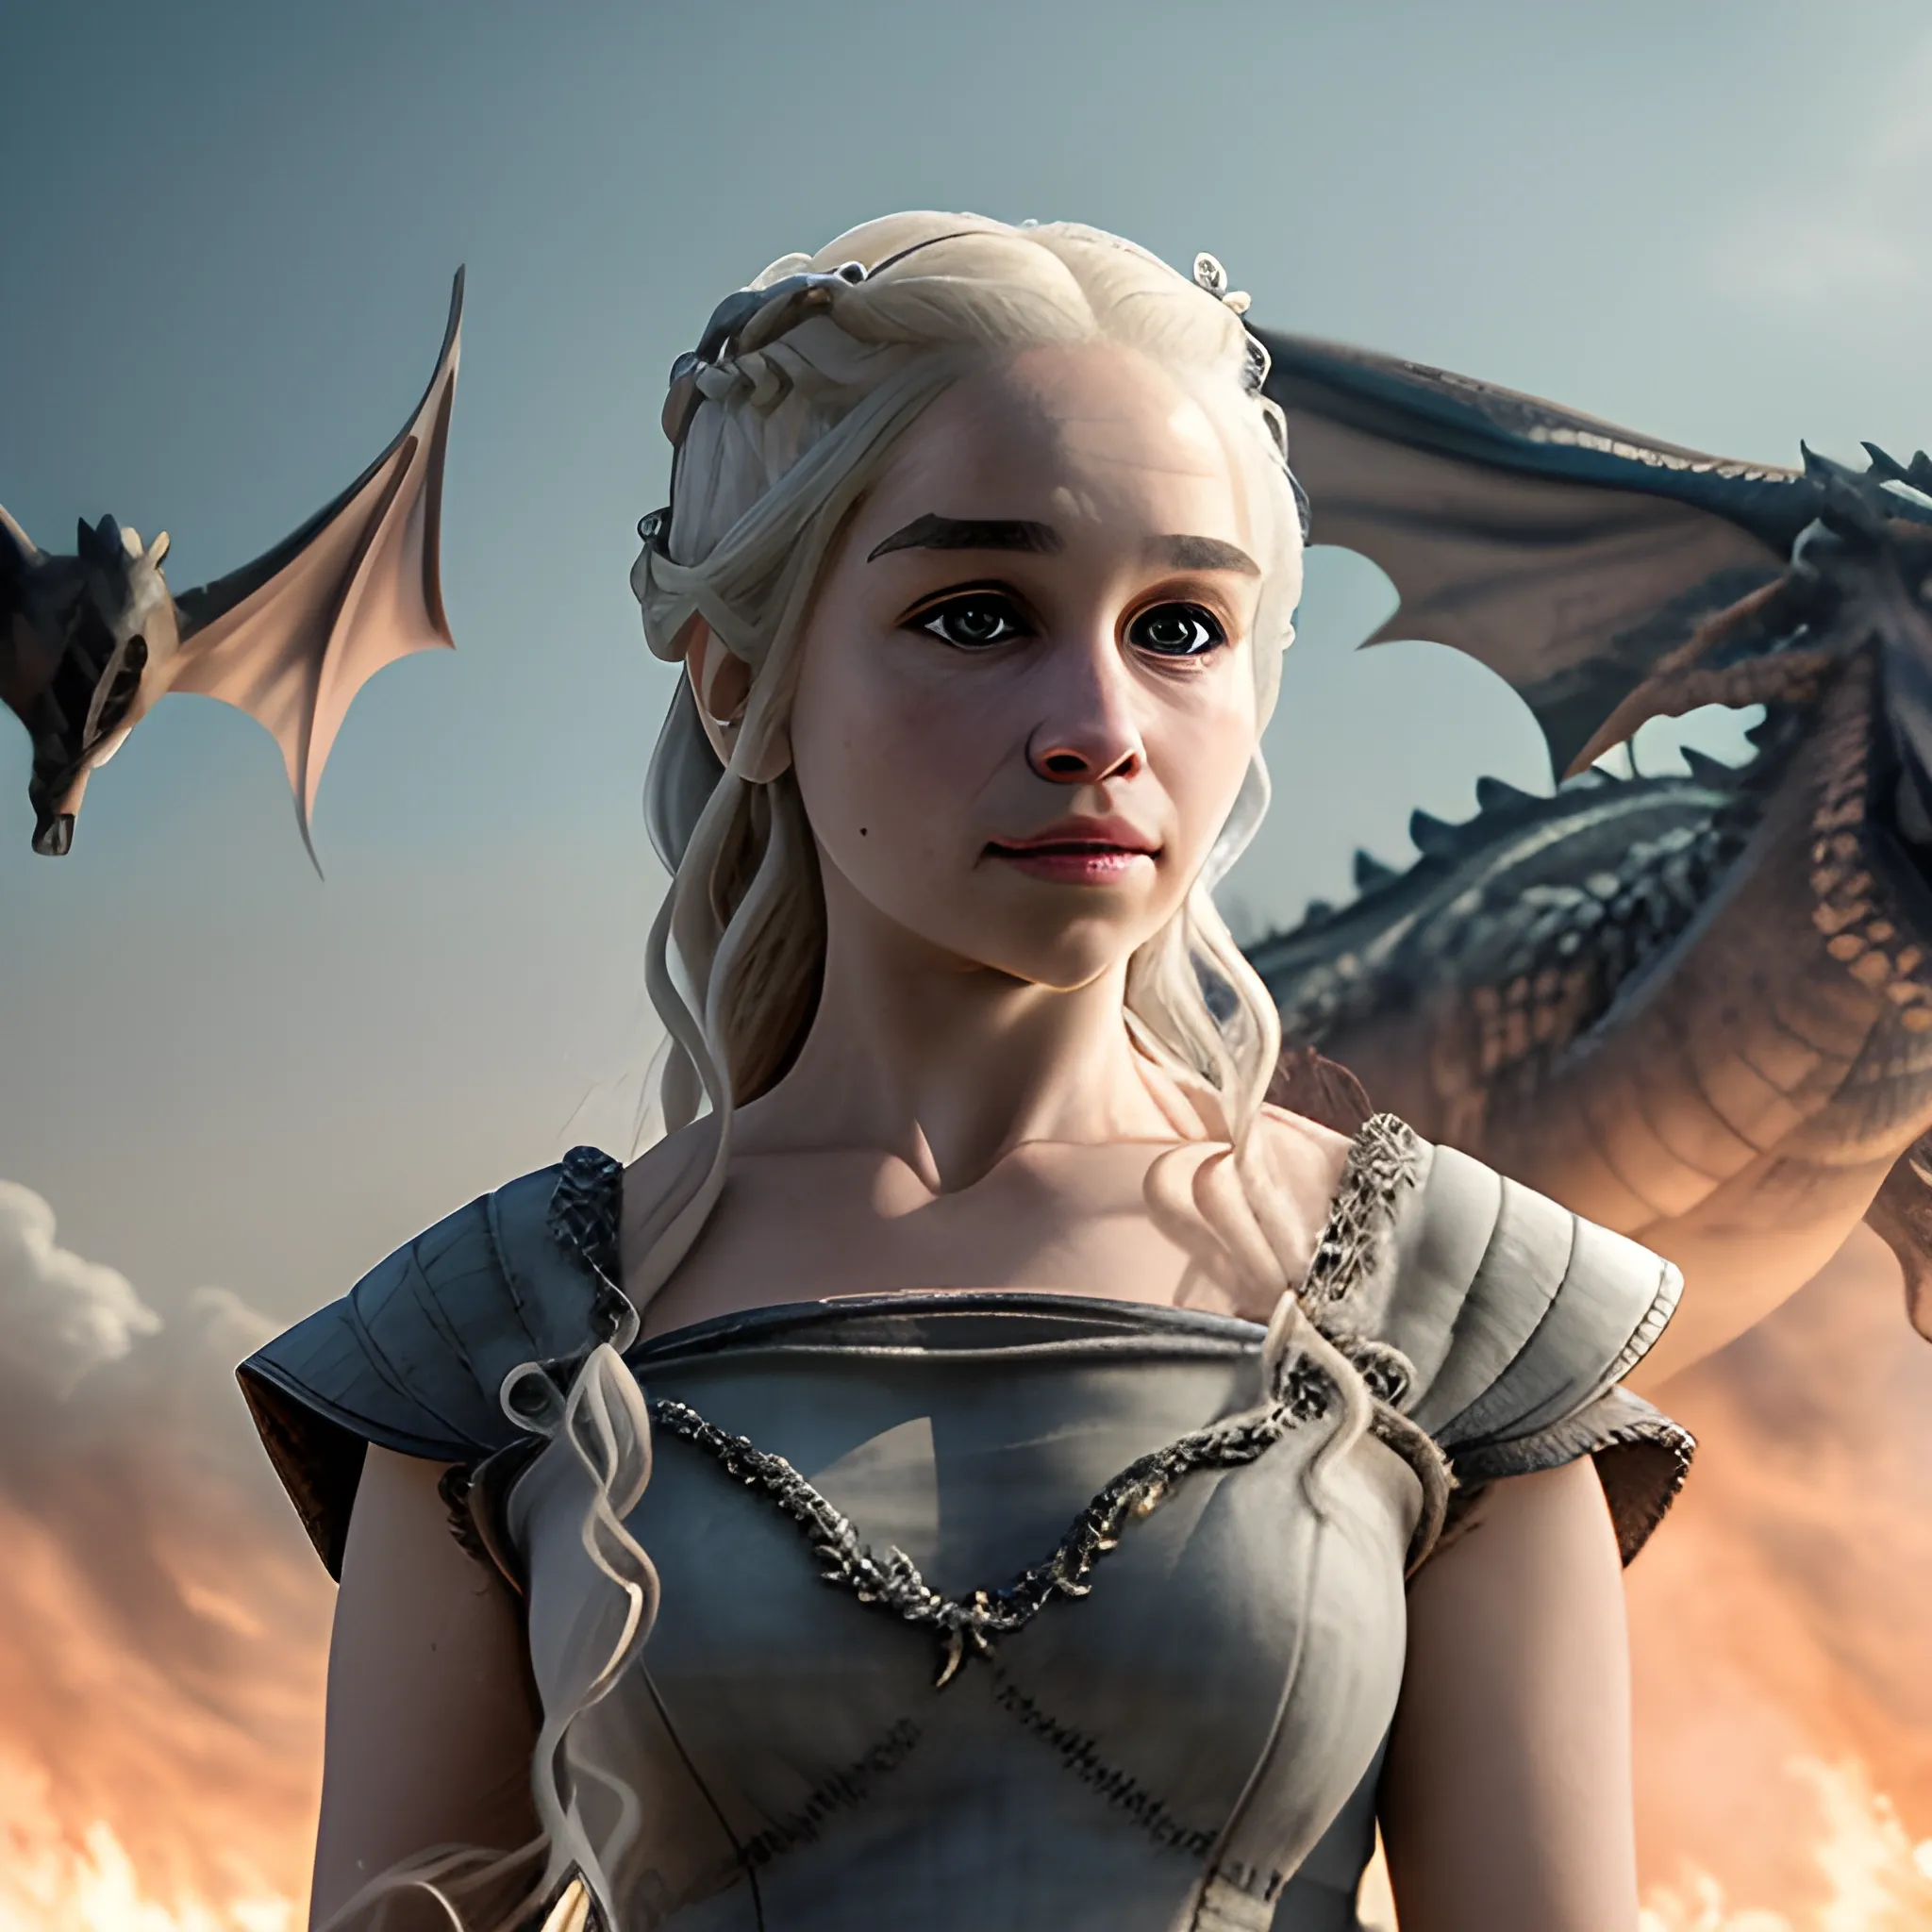 (masterpiece:1.2, best quality), (real picture, intricate details), Daenerys , solo, upper body, casual, light long hair, minimal makeup, natural fabrics, close-up face, smile, home, three dragons Flying in the sky, kingslanding burning behind